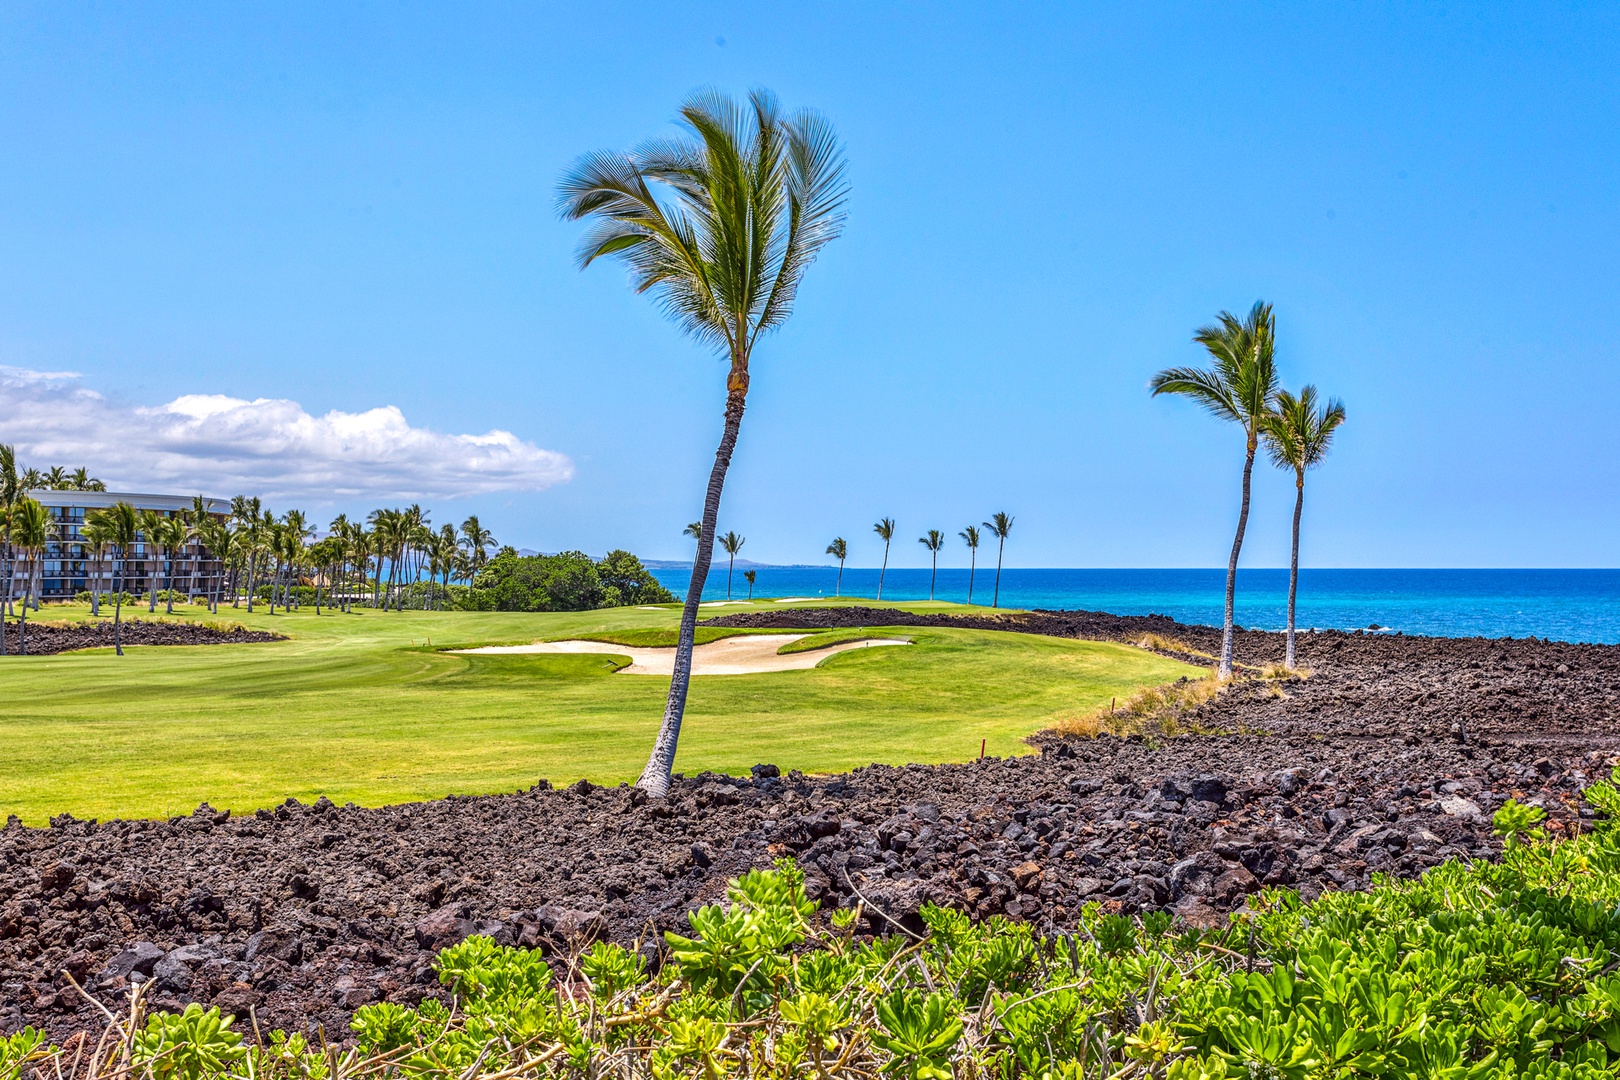 Waikoloa Vacation Rentals, 2BD Hali'i Kai (12C) at Waikoloa Resort - Walk out your front door and step right onto the oceanfront “King’s Trail” and absorb the beauty the island has to offer.